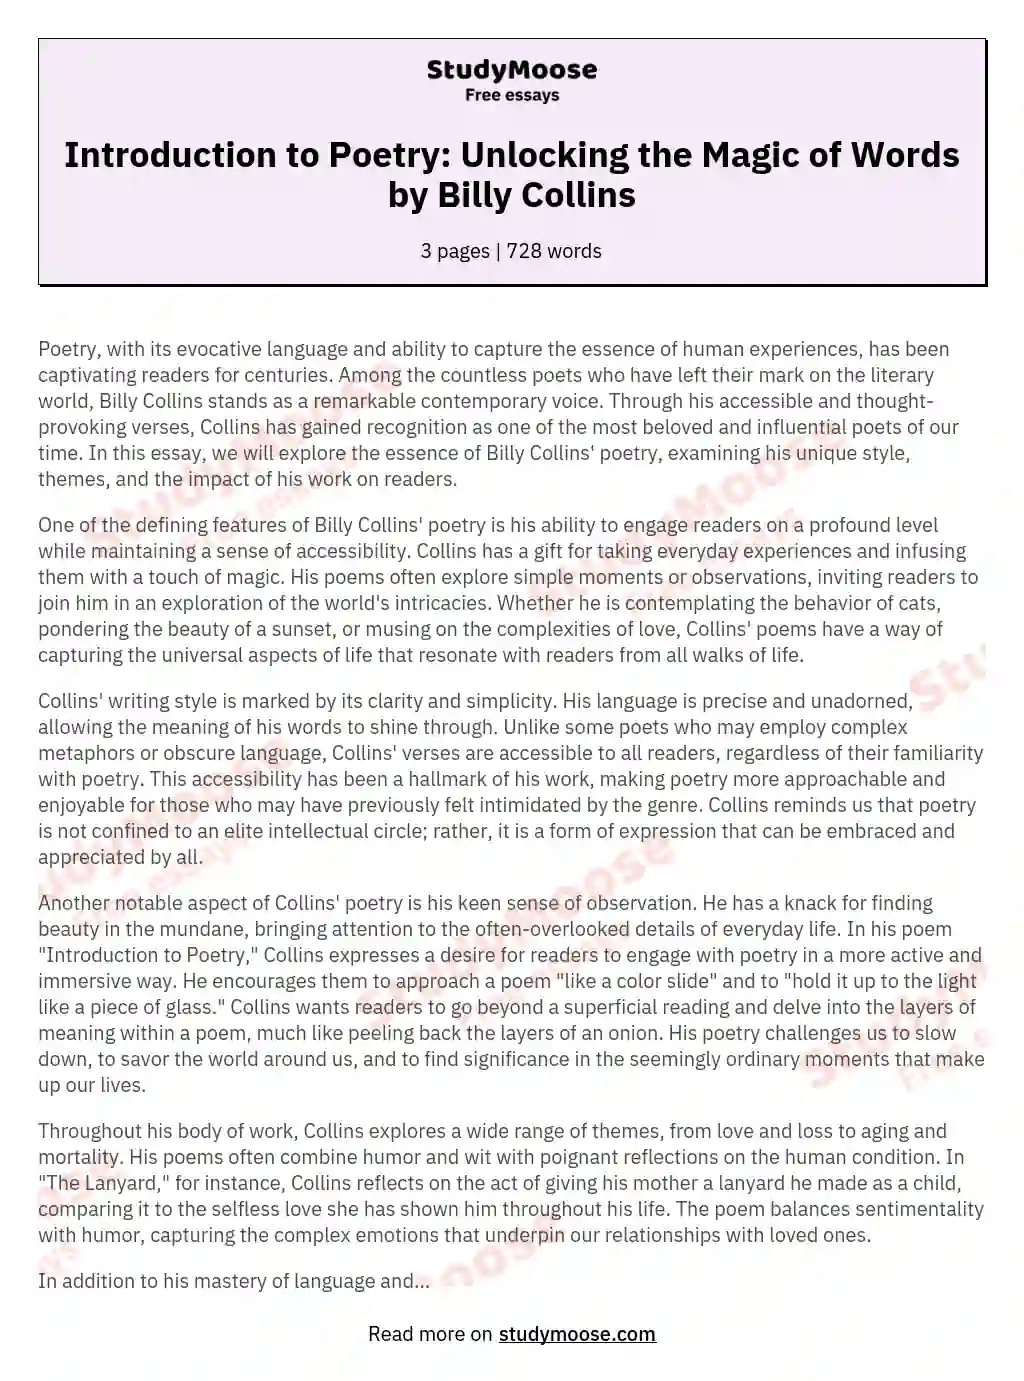 Introduction to Poetry: Unlocking the Magic of Words by Billy Collins essay